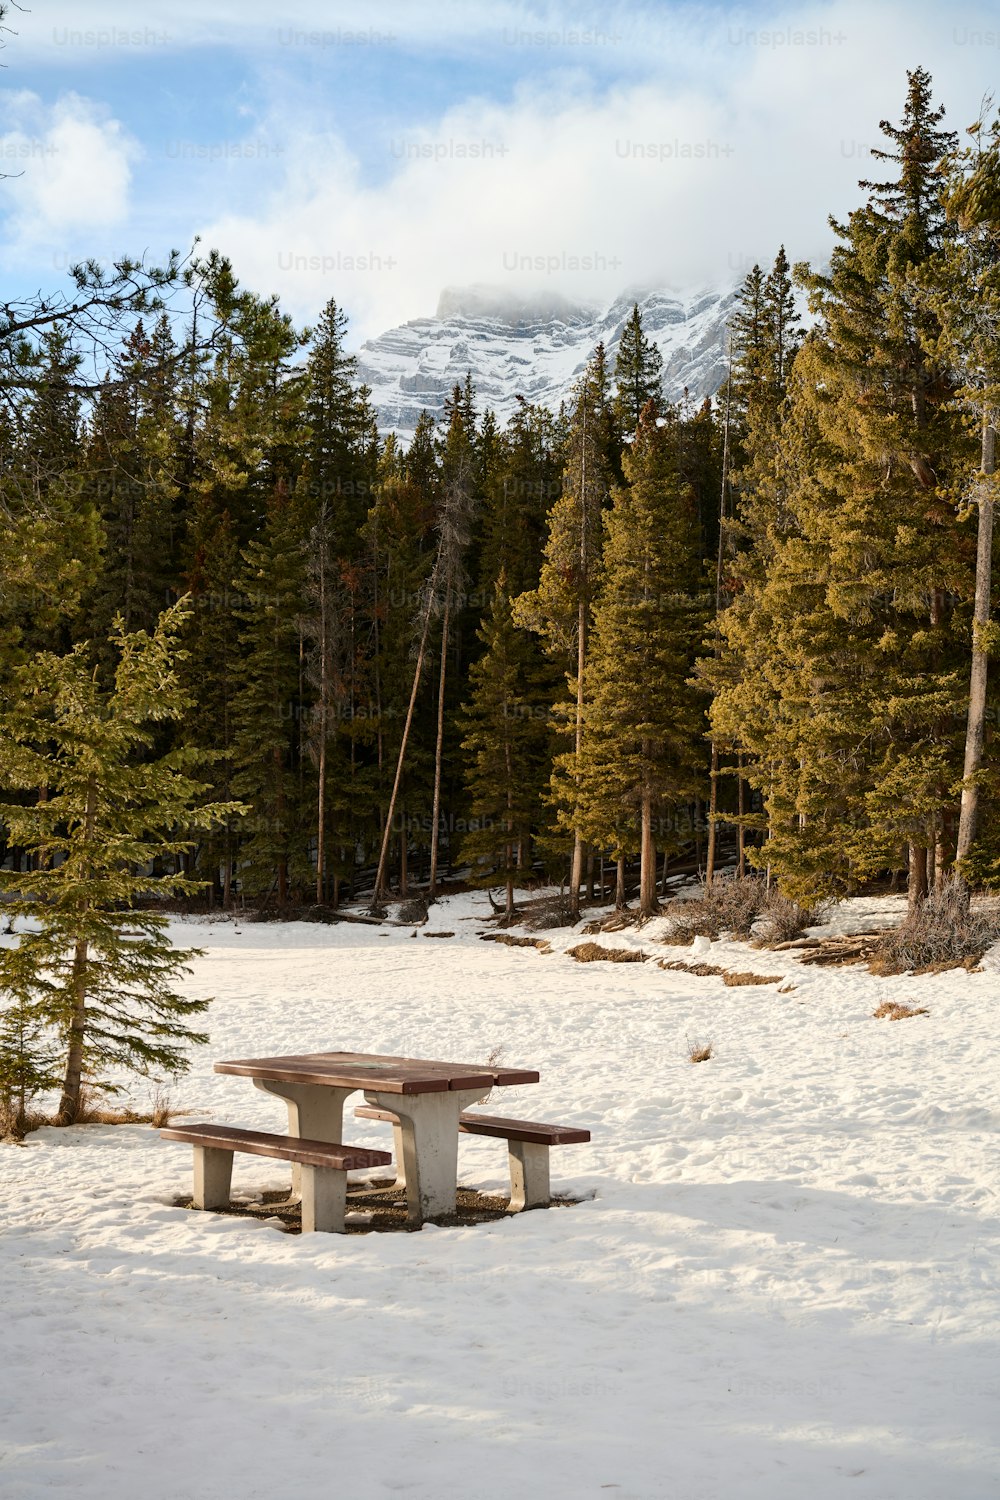 a picnic table in the middle of a snowy field